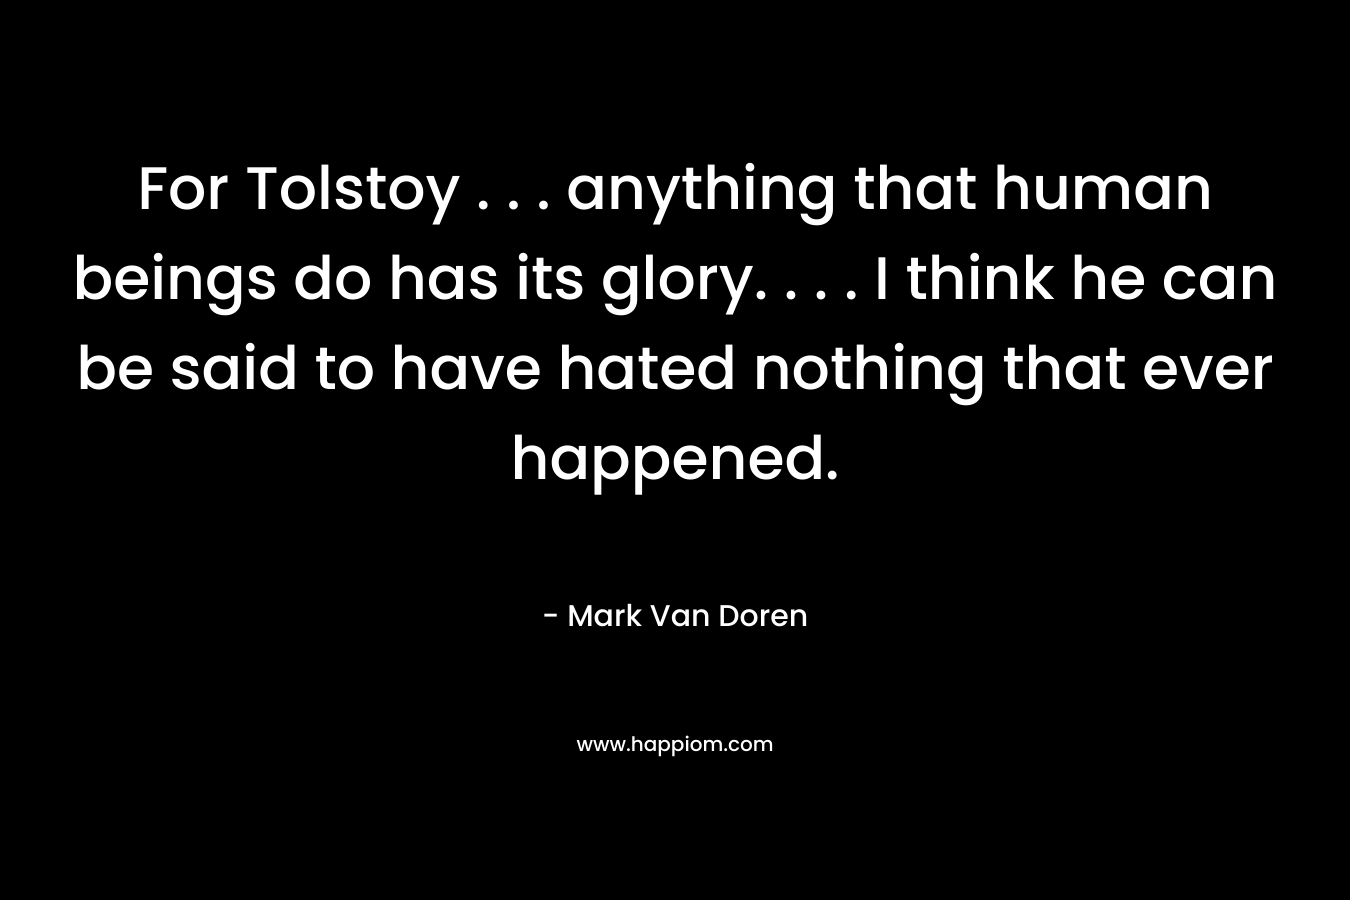 For Tolstoy . . . anything that human beings do has its glory. . . . I think he can be said to have hated nothing that ever happened. – Mark Van Doren